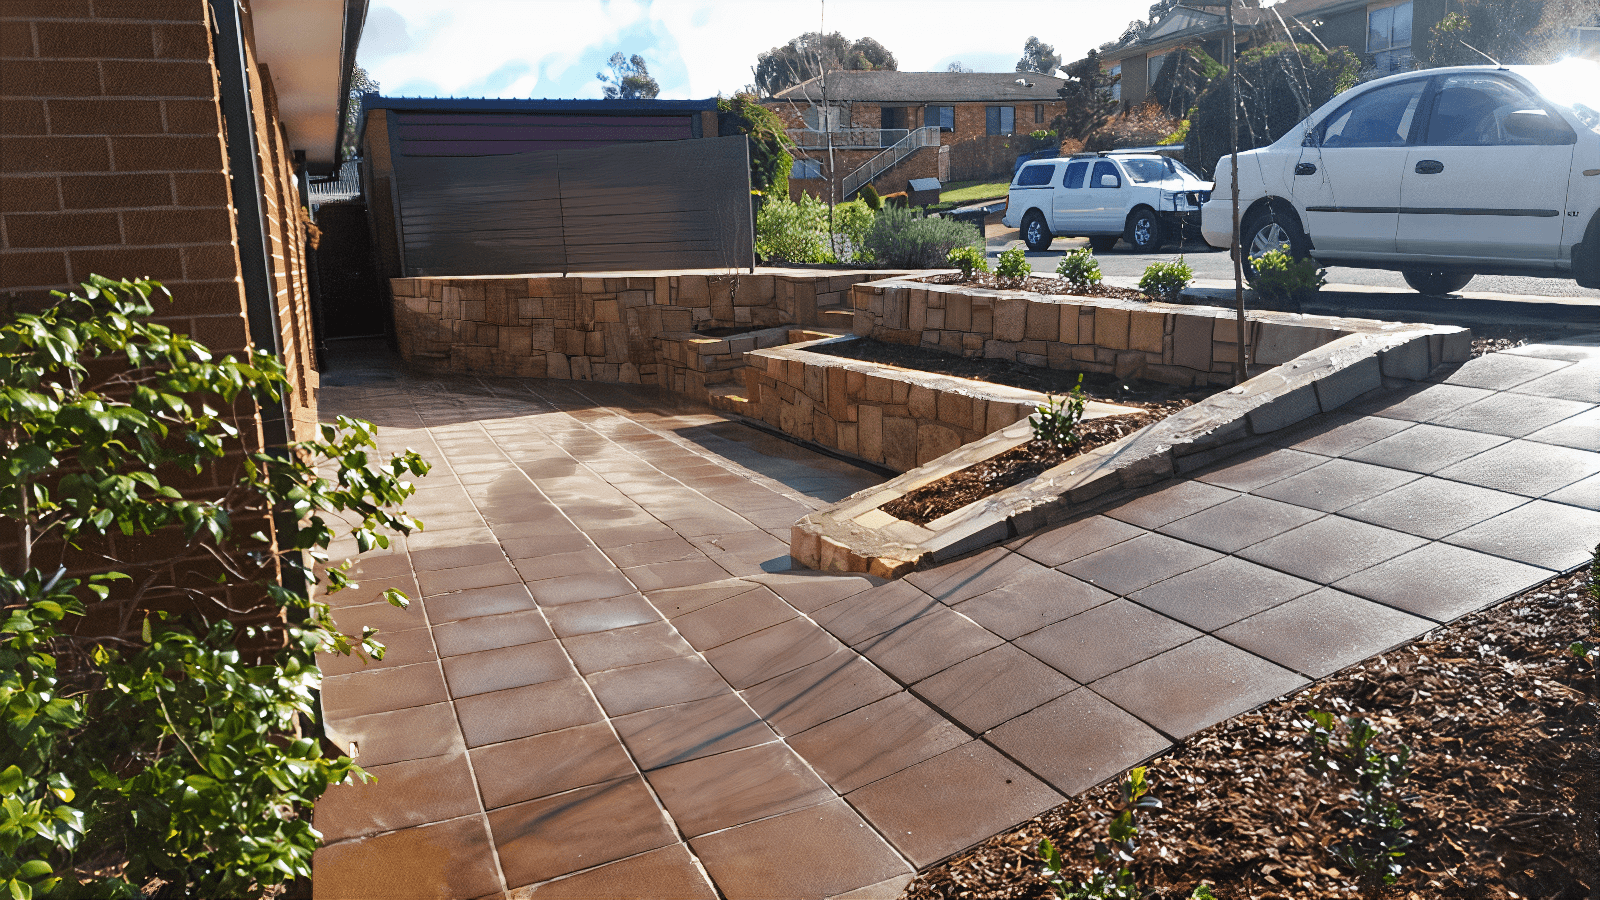 Outdoor entertaining area with retaining wall